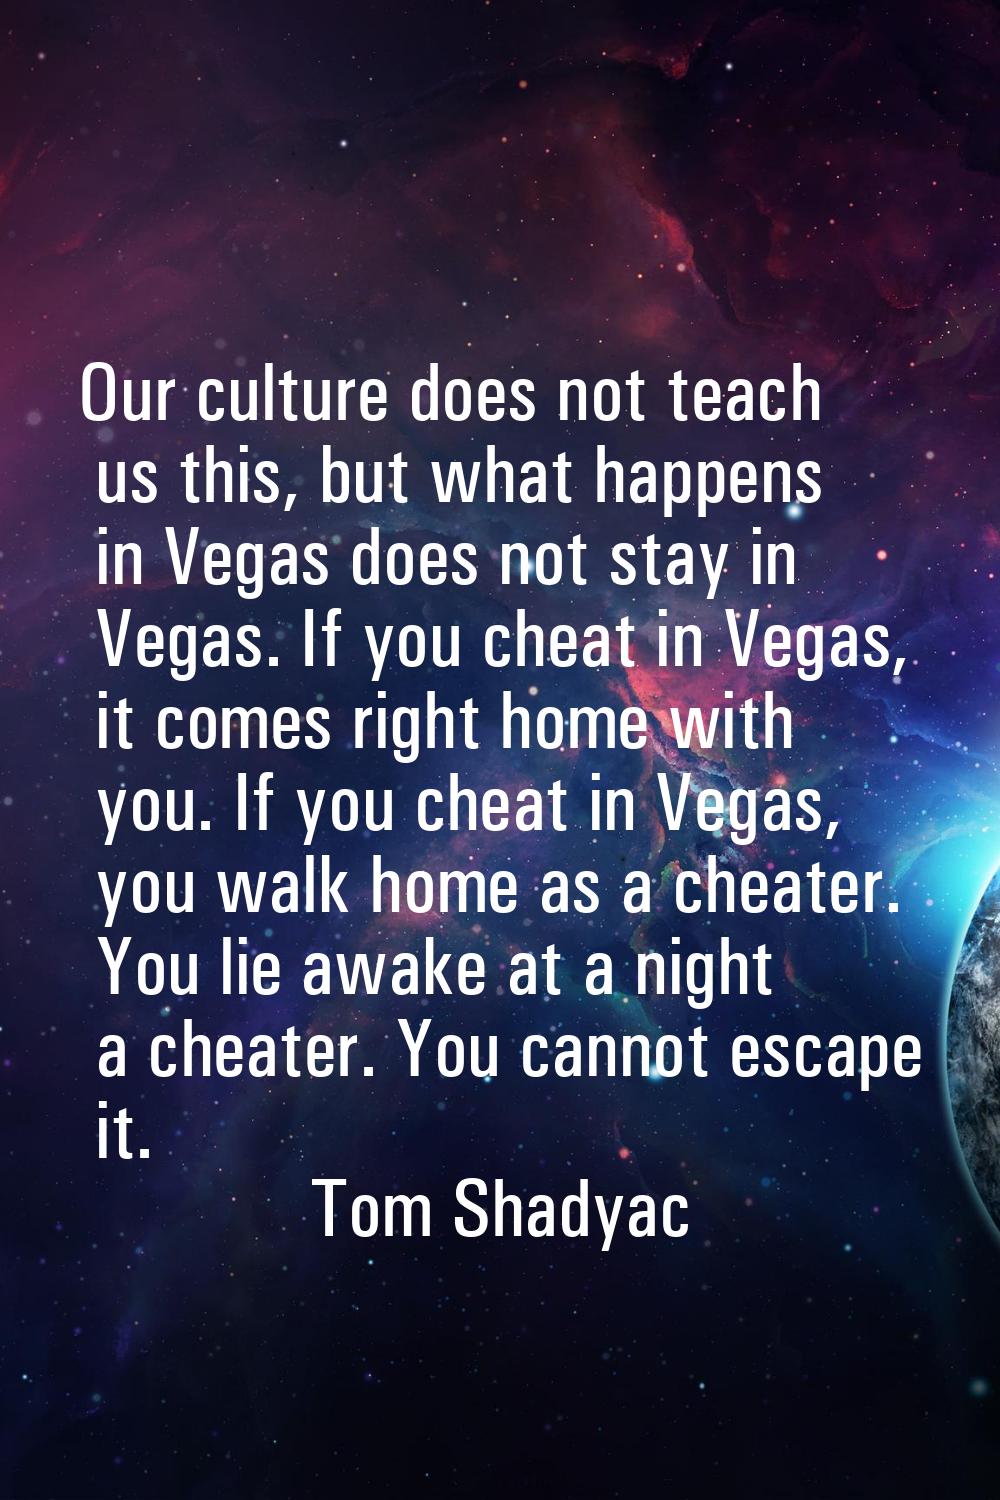 Our culture does not teach us this, but what happens in Vegas does not stay in Vegas. If you cheat 